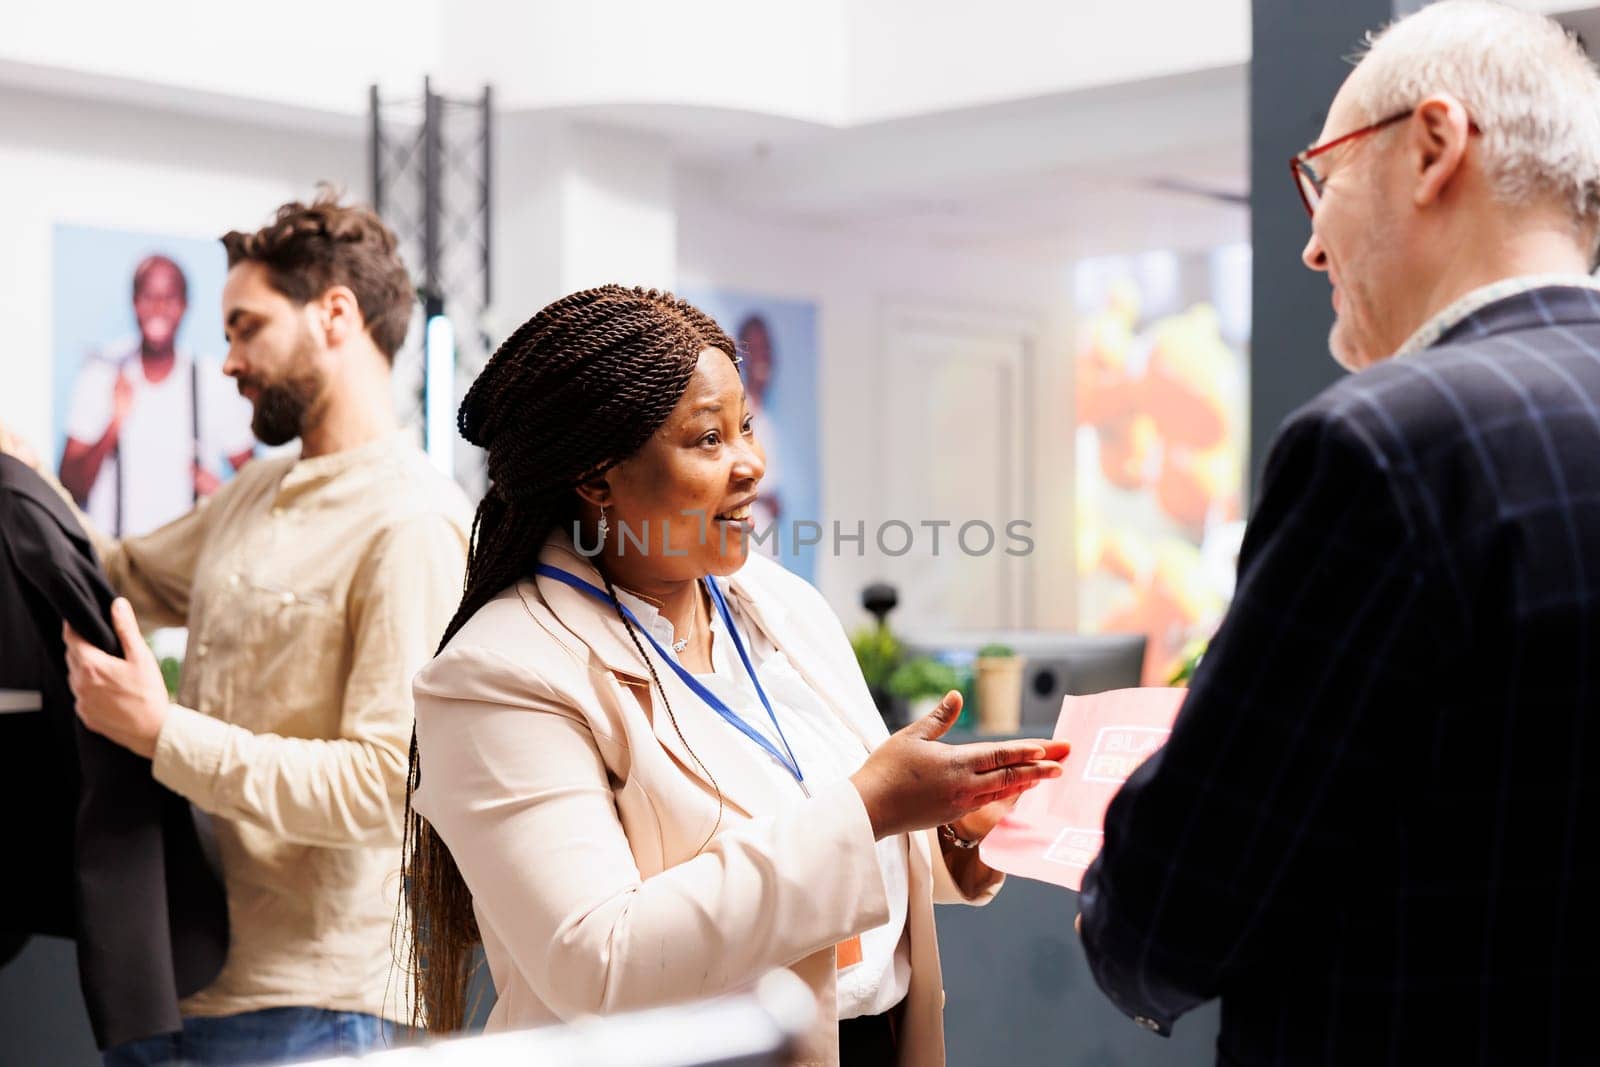 Friendly smiling African American woman shop sales assistant explaining senior man customer Black Friday shopping rules in clothing store. Retail worker holding sales flyer talking with shopper